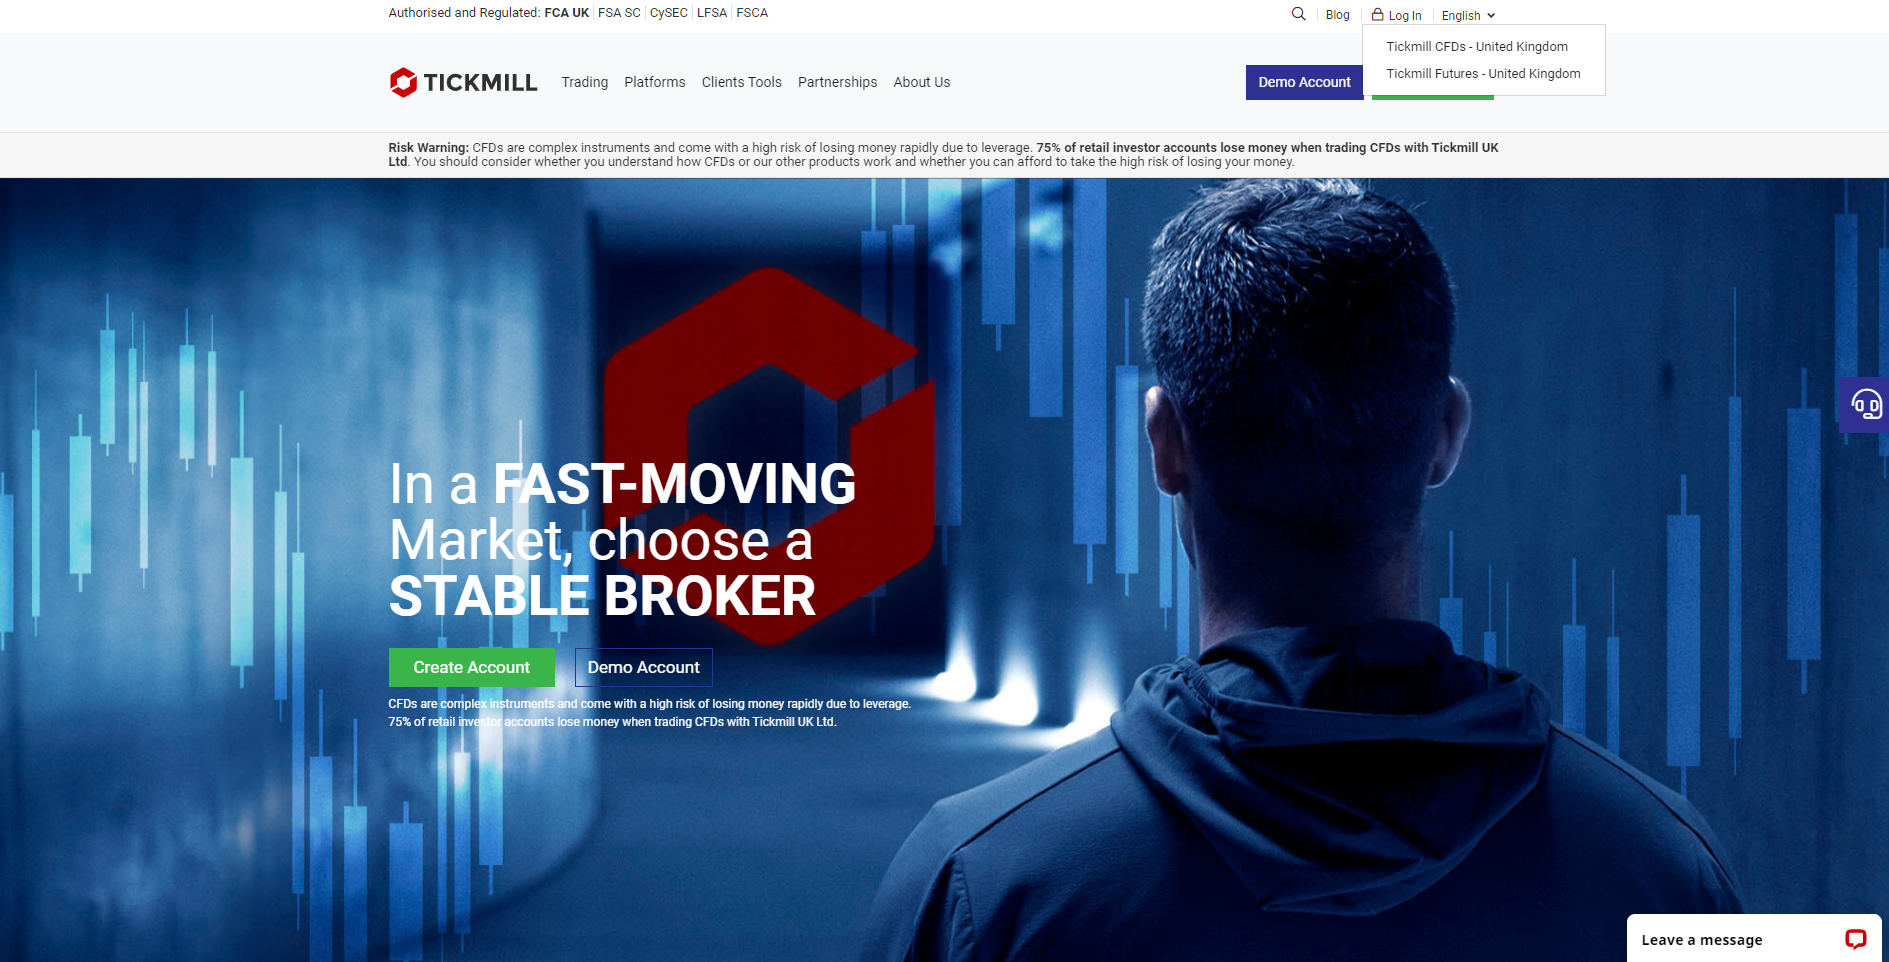 Official website of the forex broker Tickmill in the UK